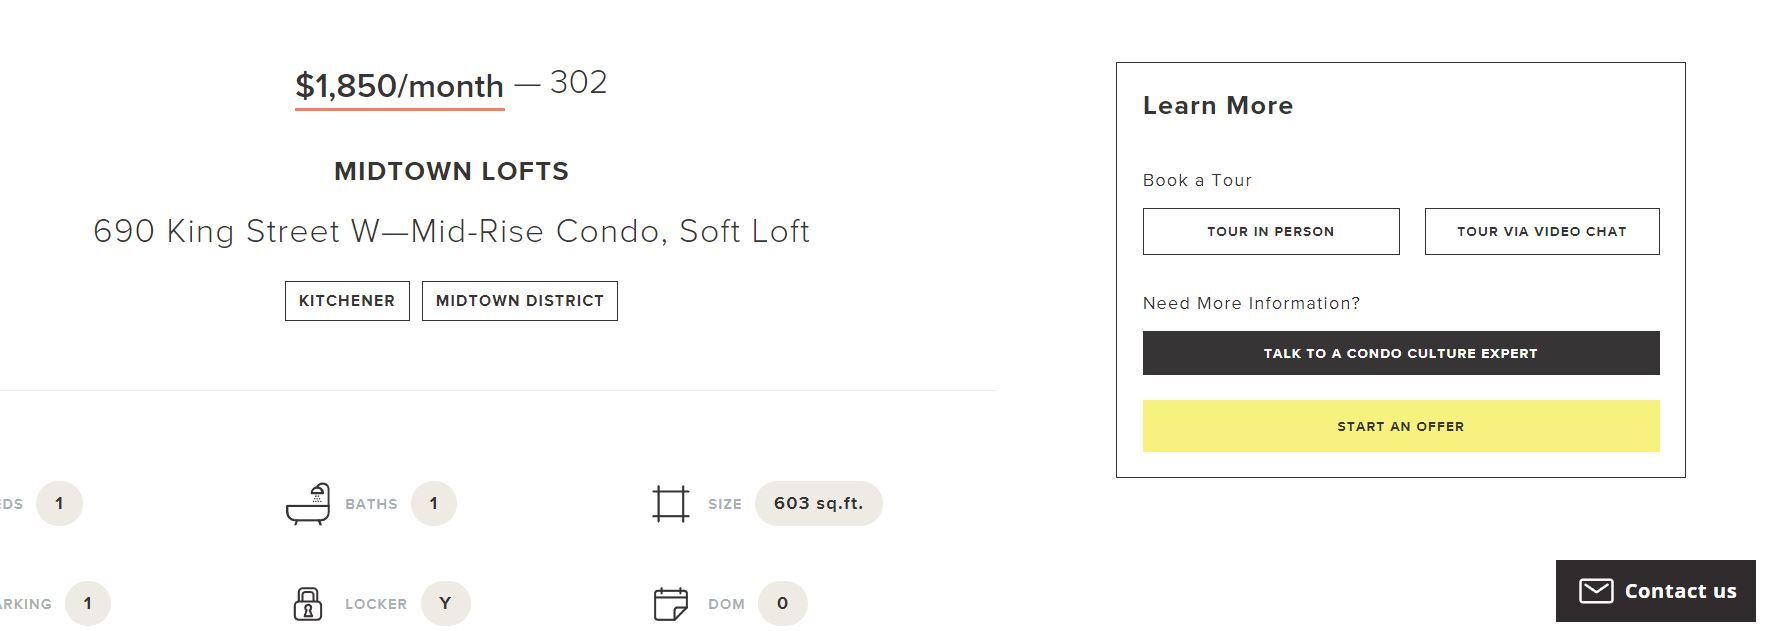 New Leasing Experience on CondoCulture.ca